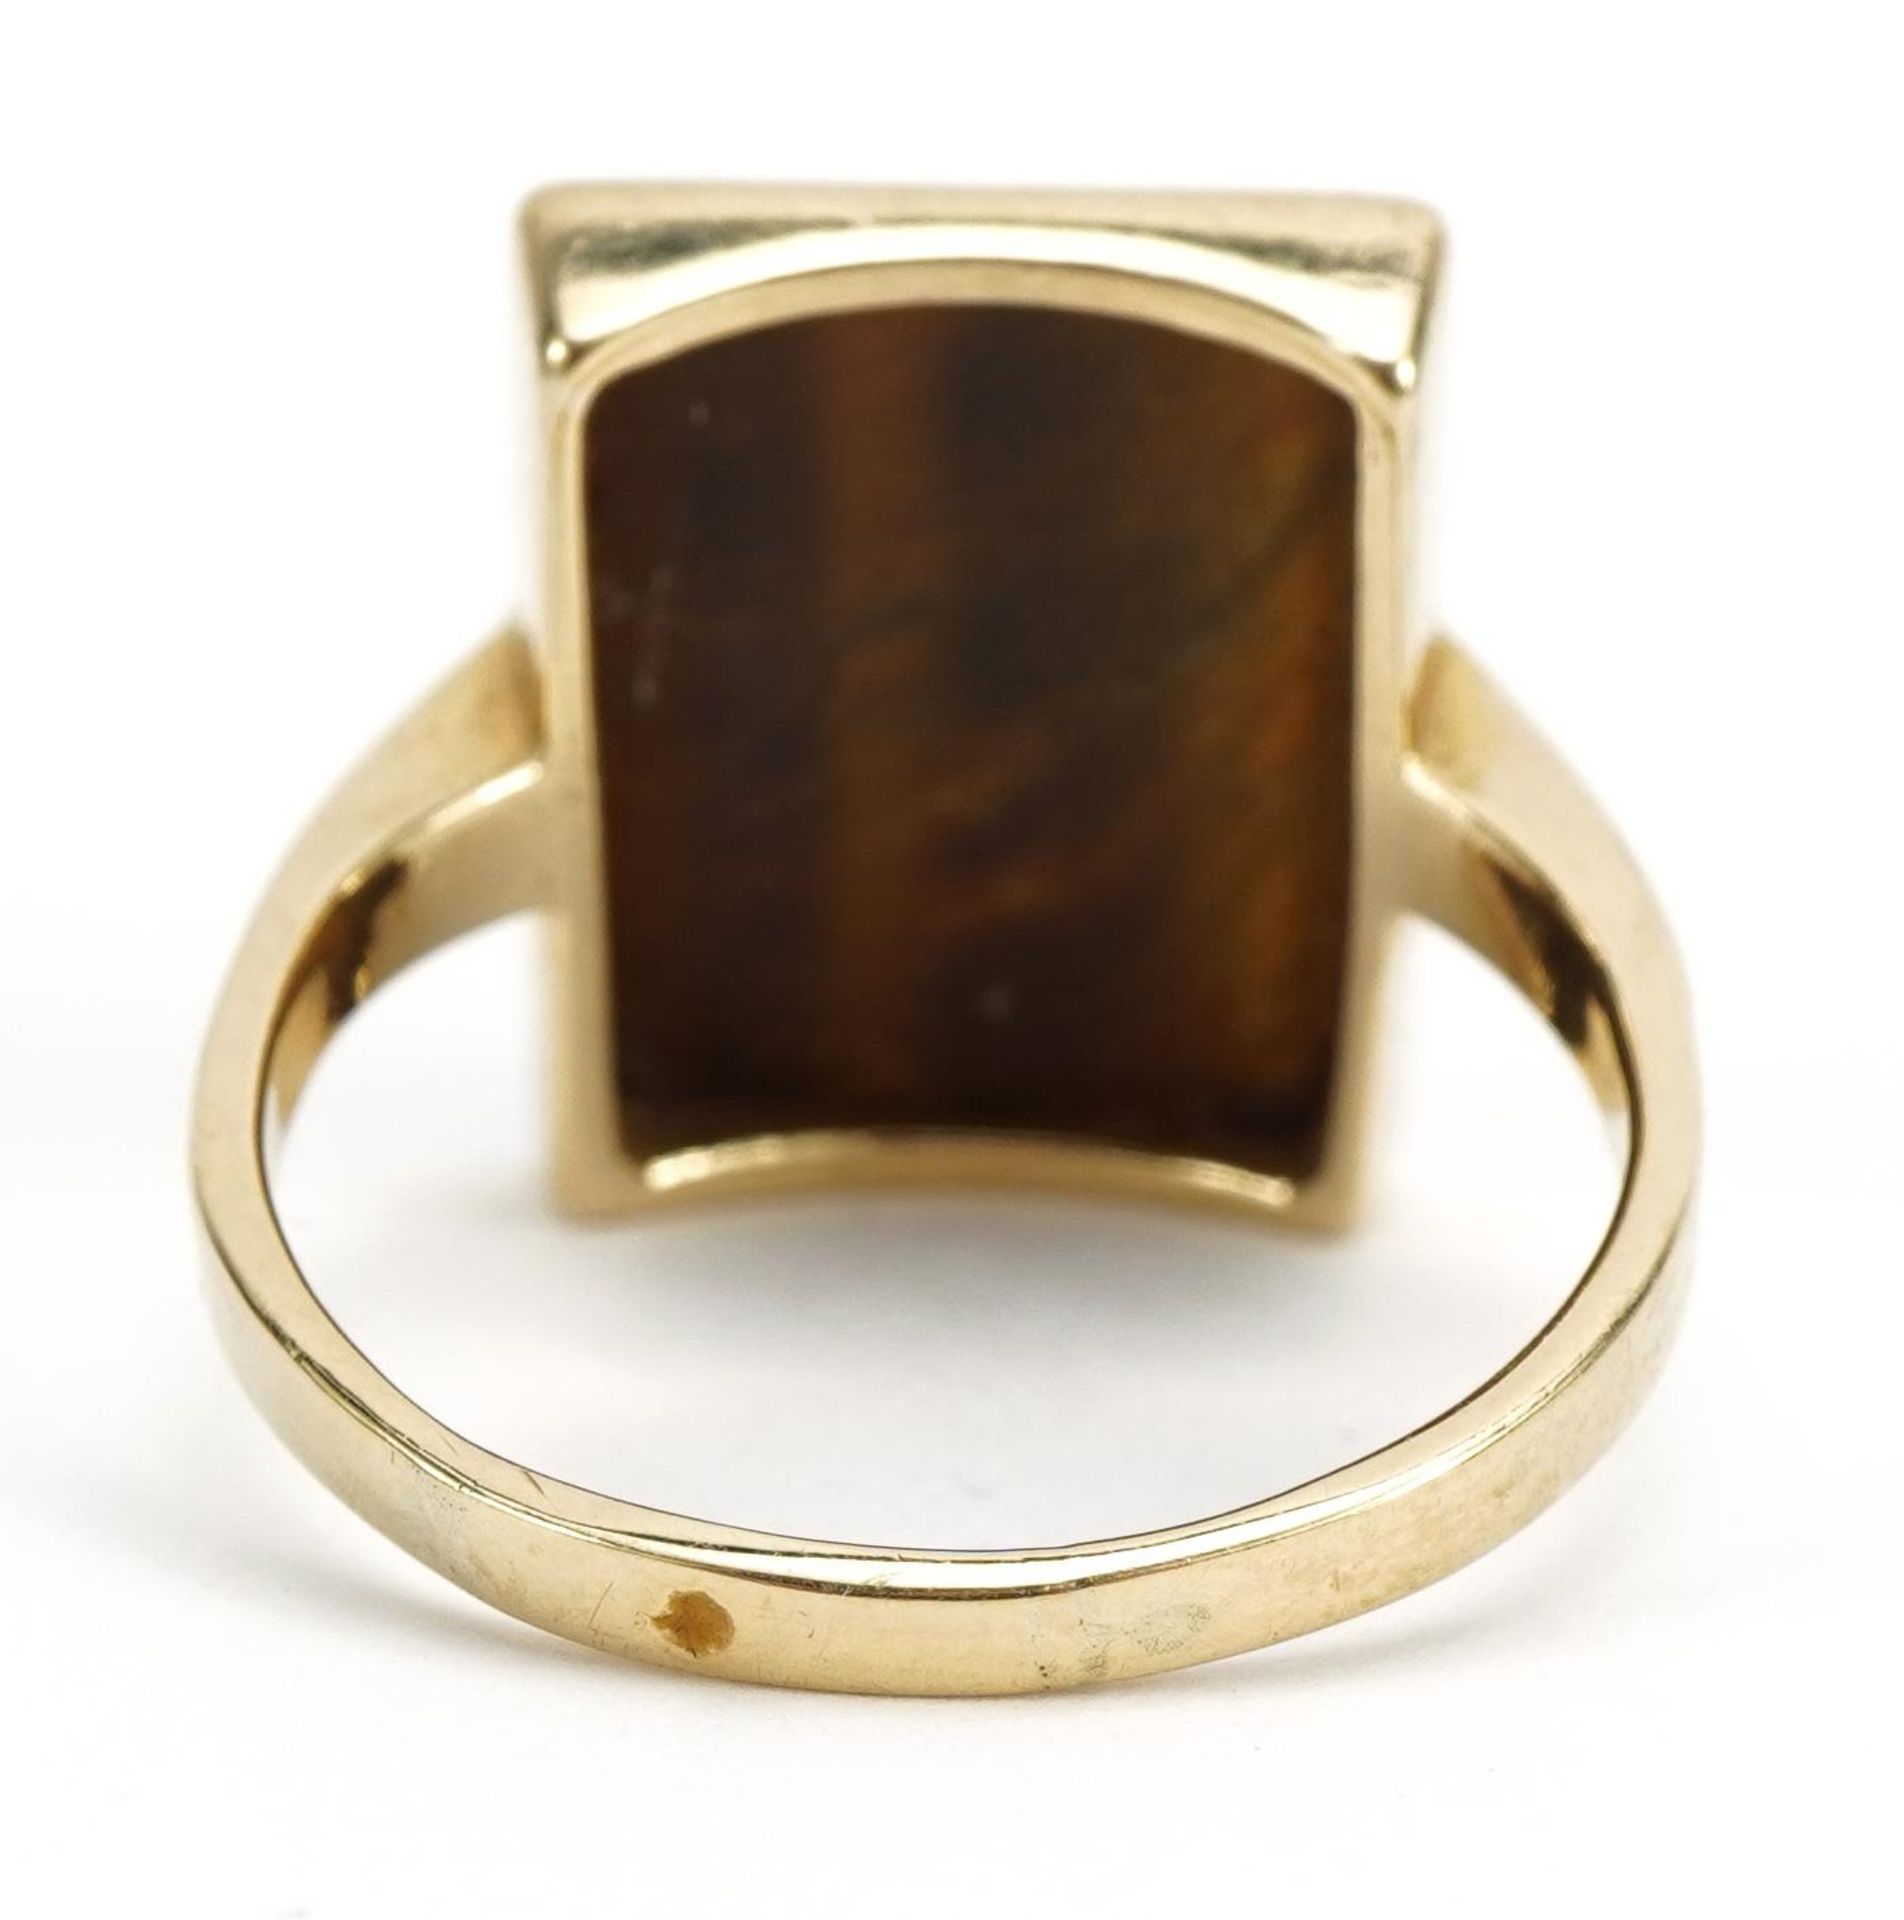 9ct gold tiger's eye ring carved in relief with a Roman bust, size R/S, 5.1g - Image 2 of 3